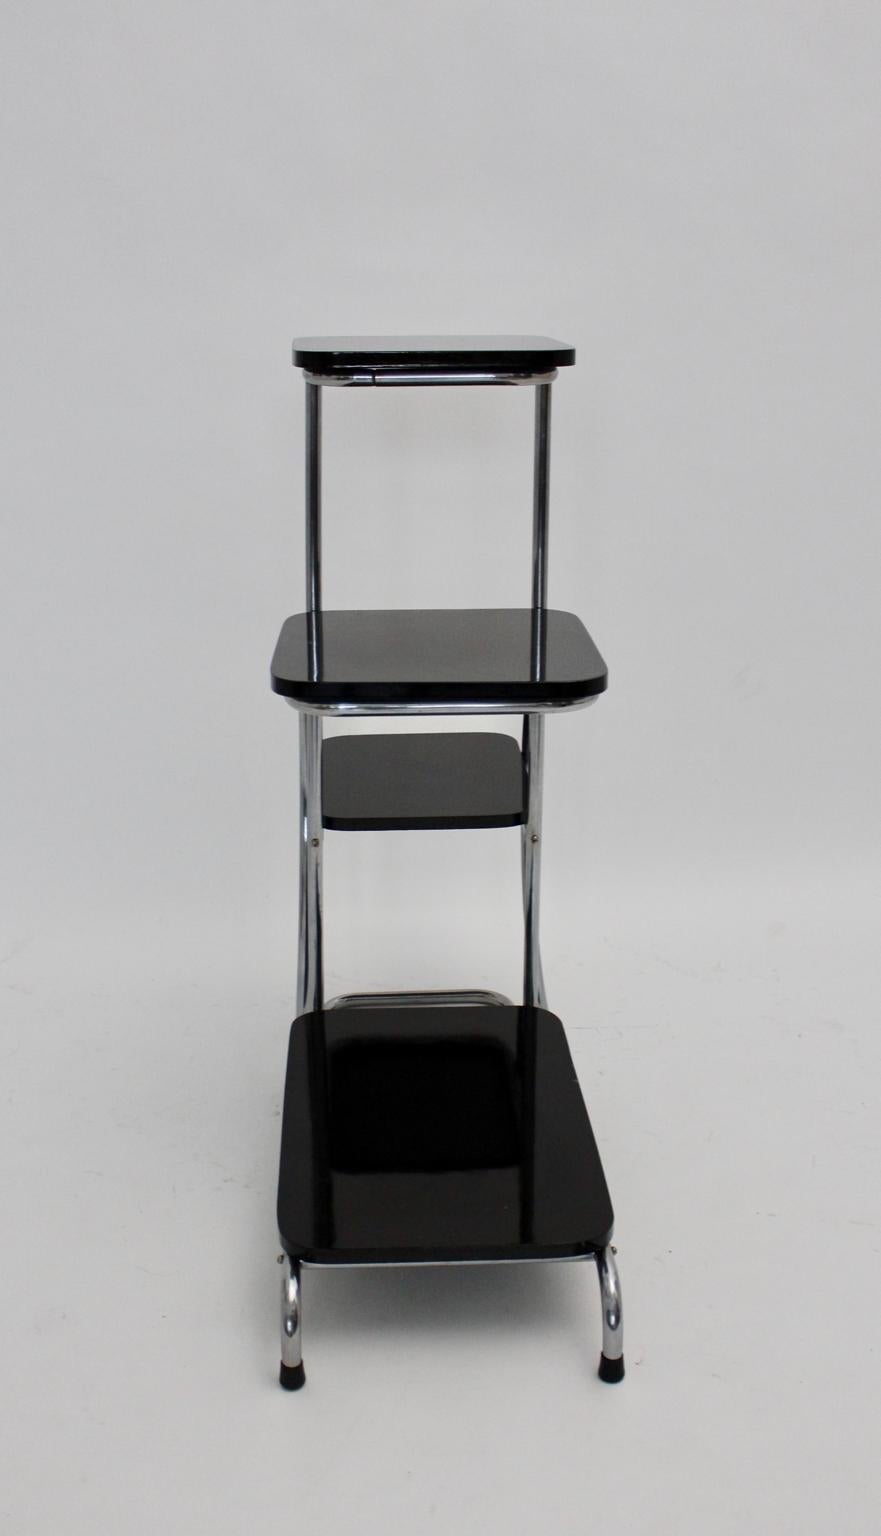 Mid-20th Century Art Deco Vintage Chromed Metal Black Wood Side Table by Emile Guyot 1930s France For Sale